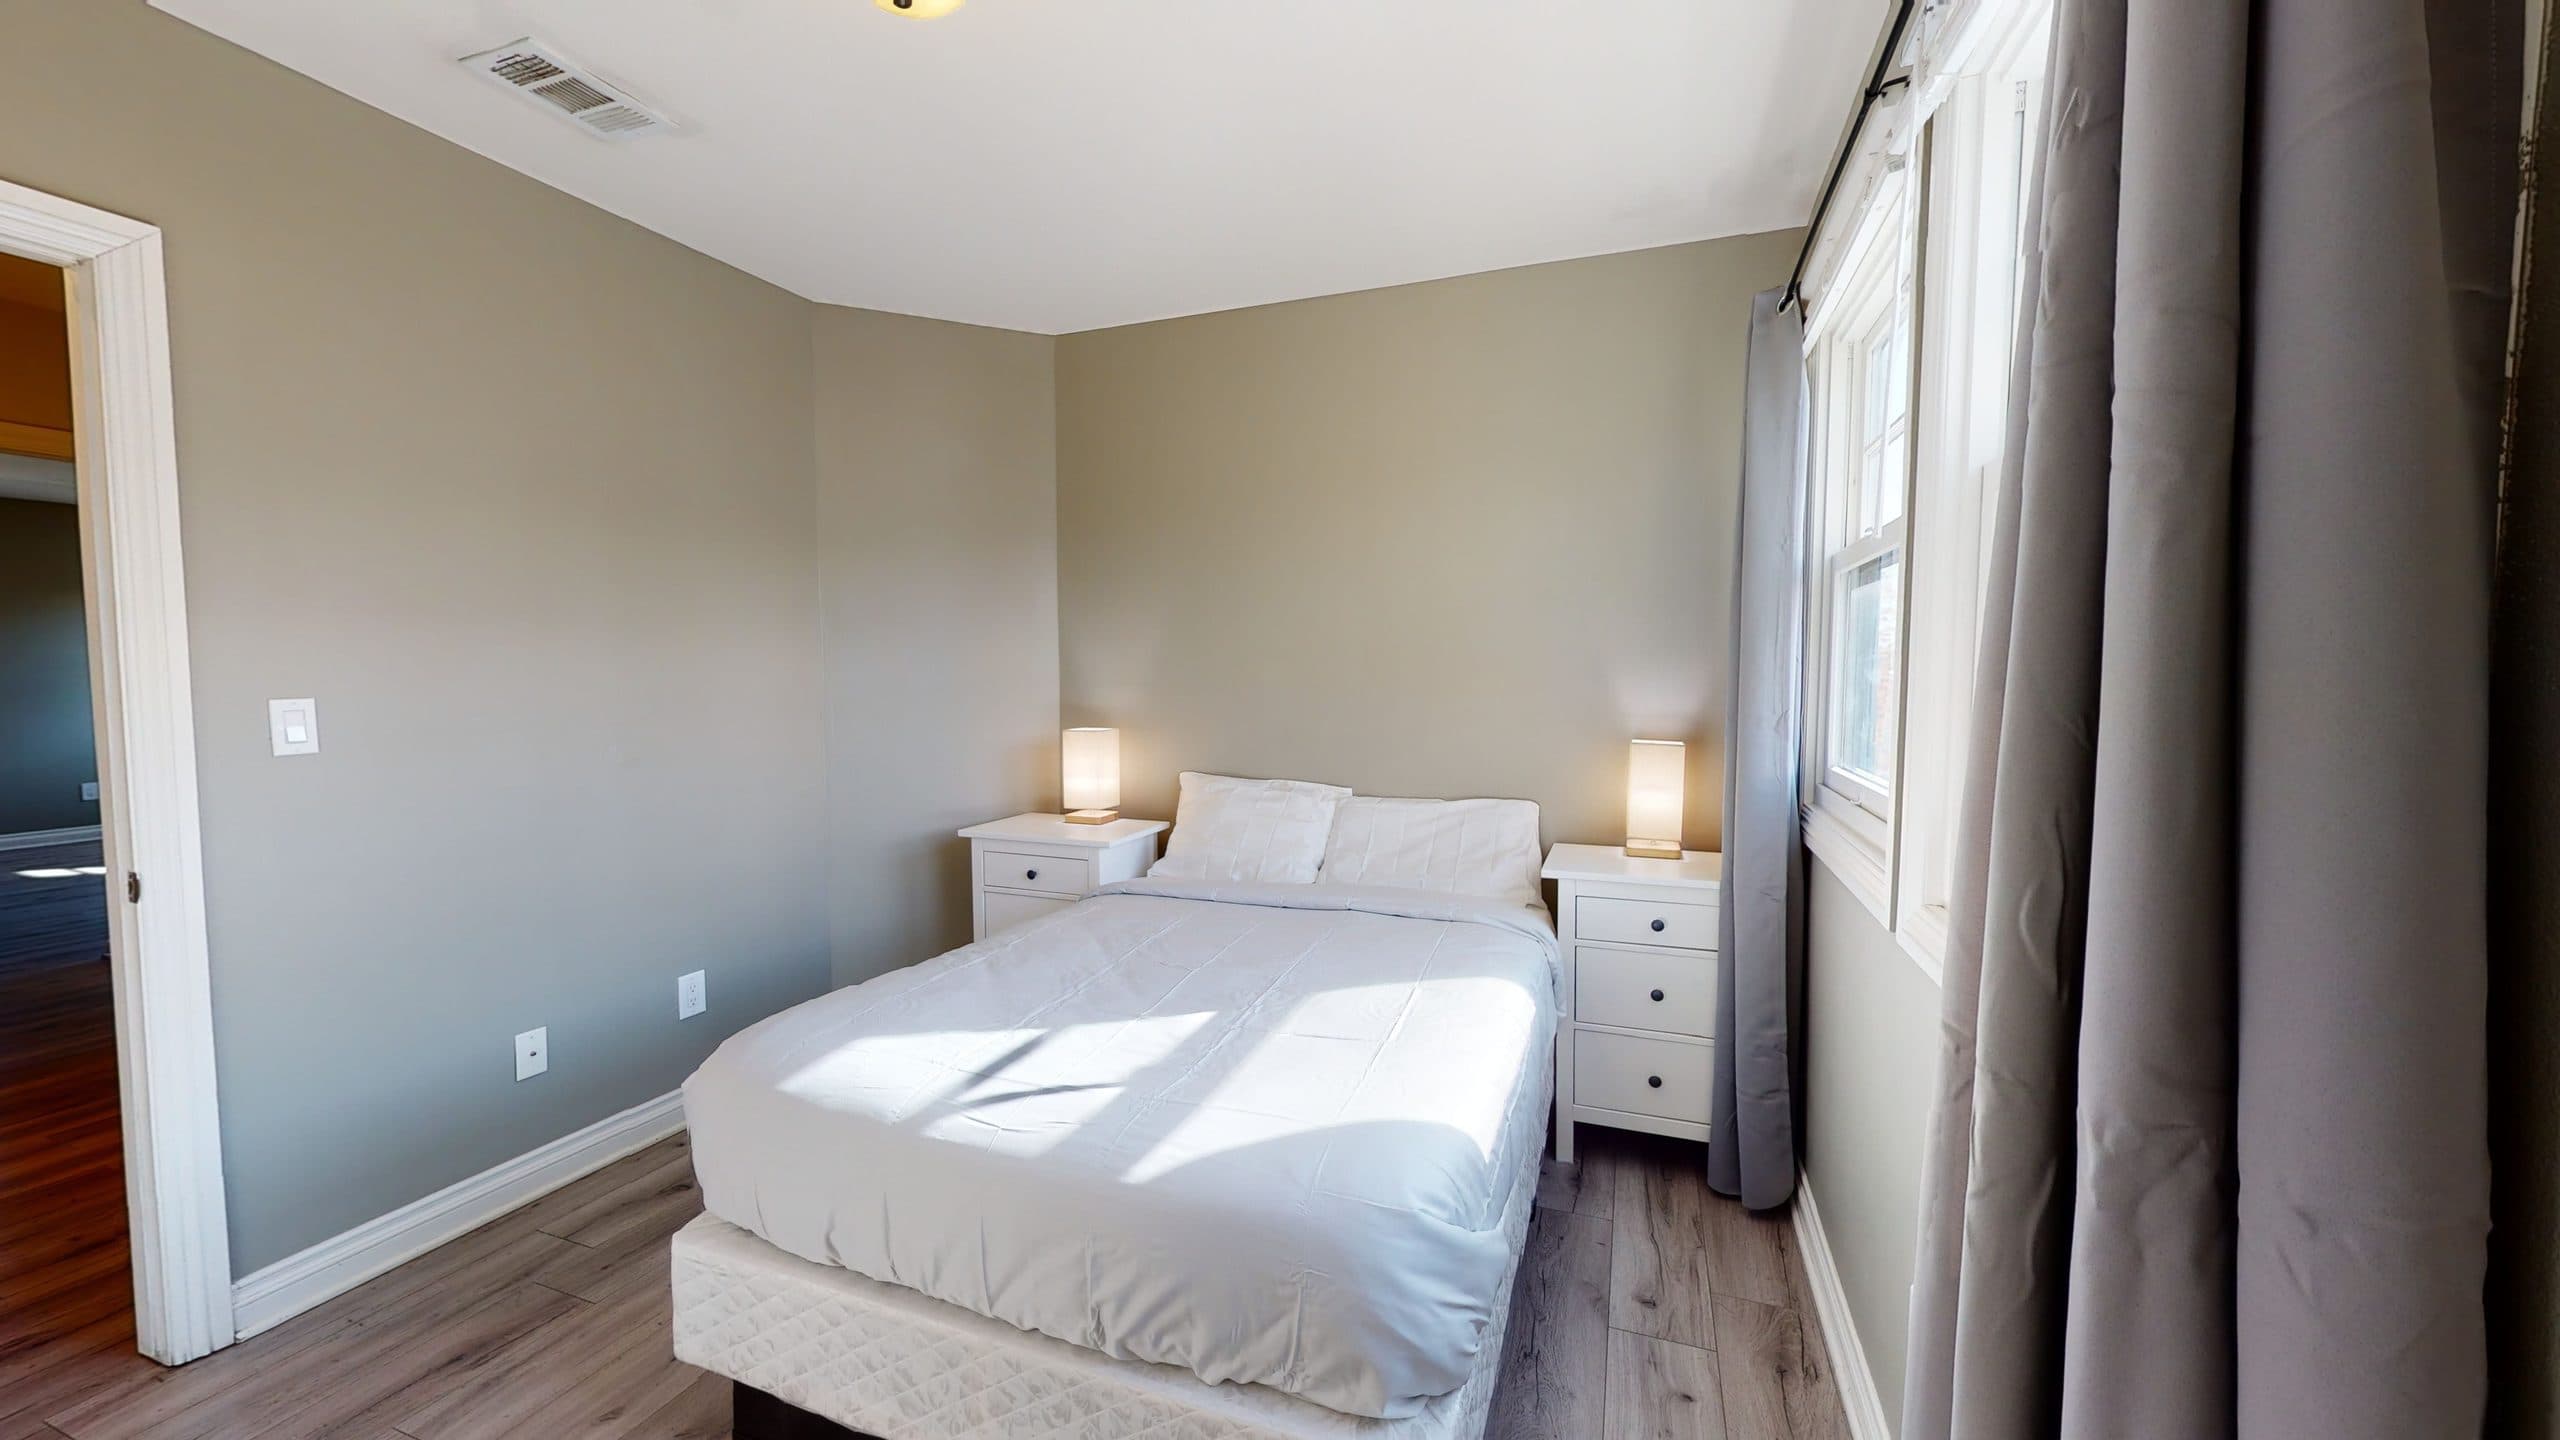 Photo 2 of #2445: Queen Bedroom A (Furnished only) at June Homes